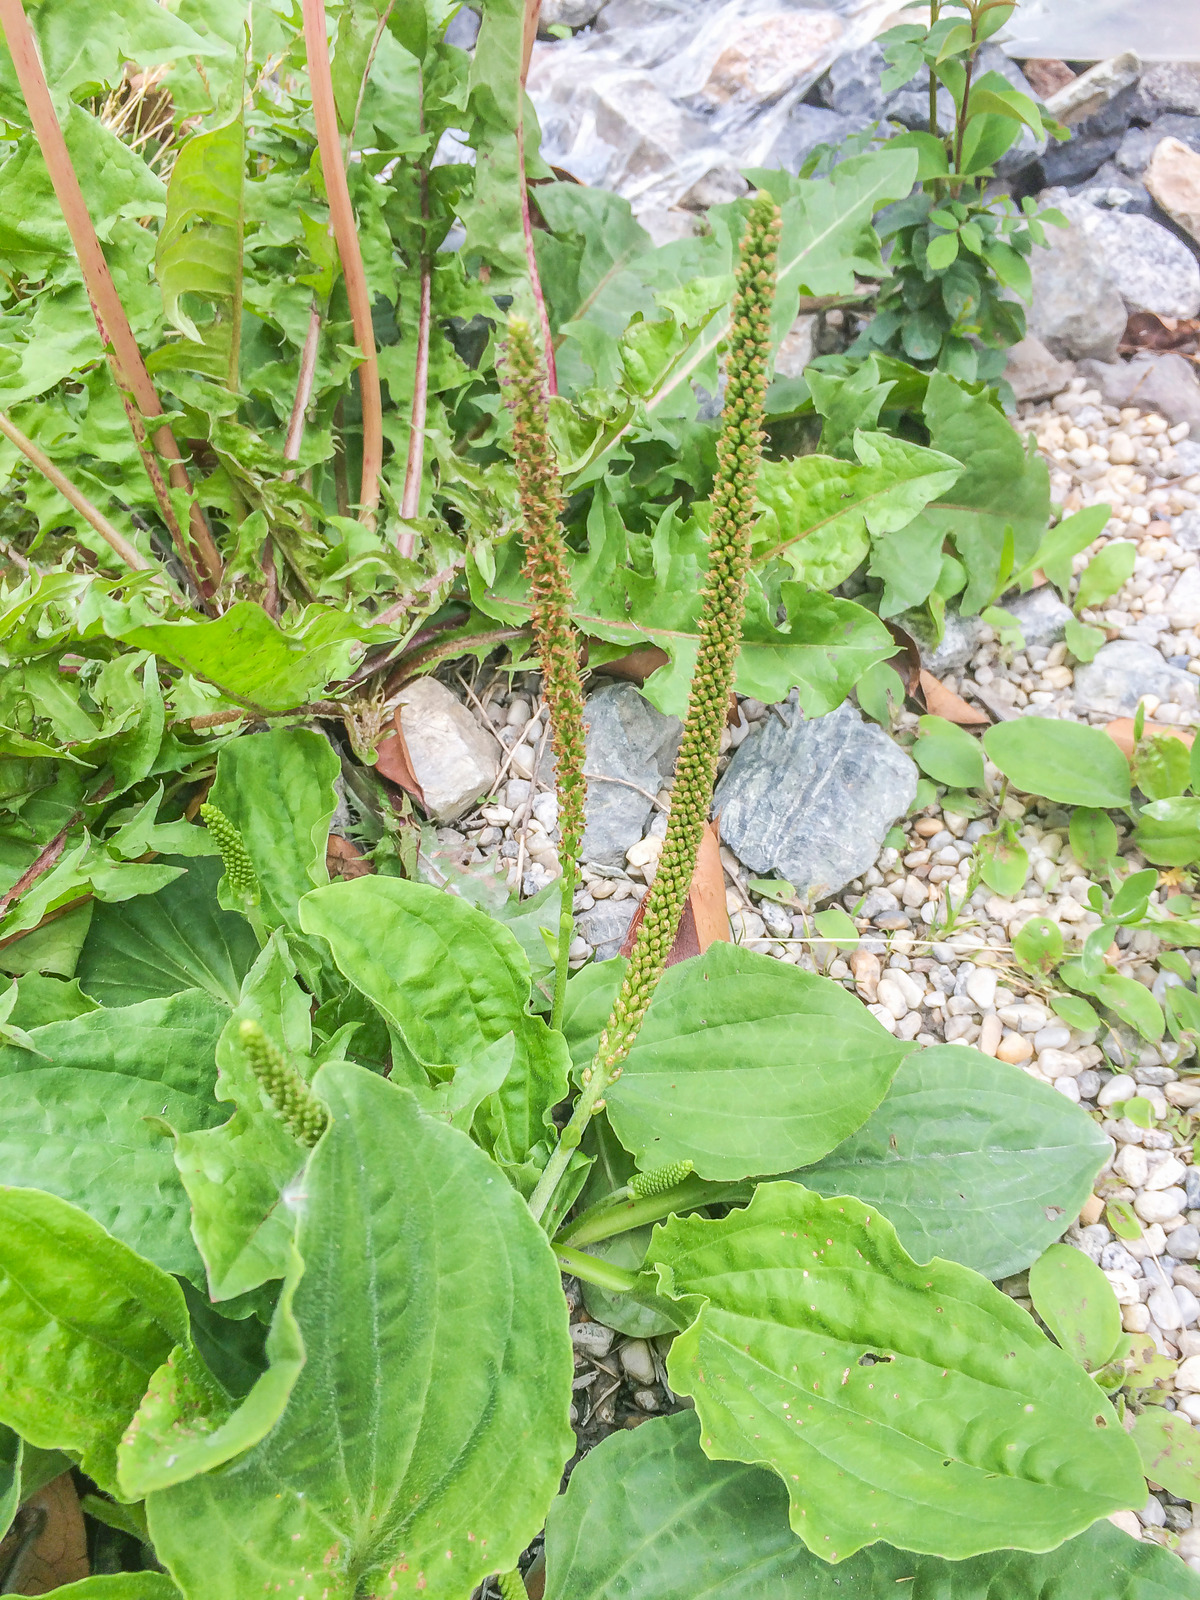 Broadleaf or greater plantain